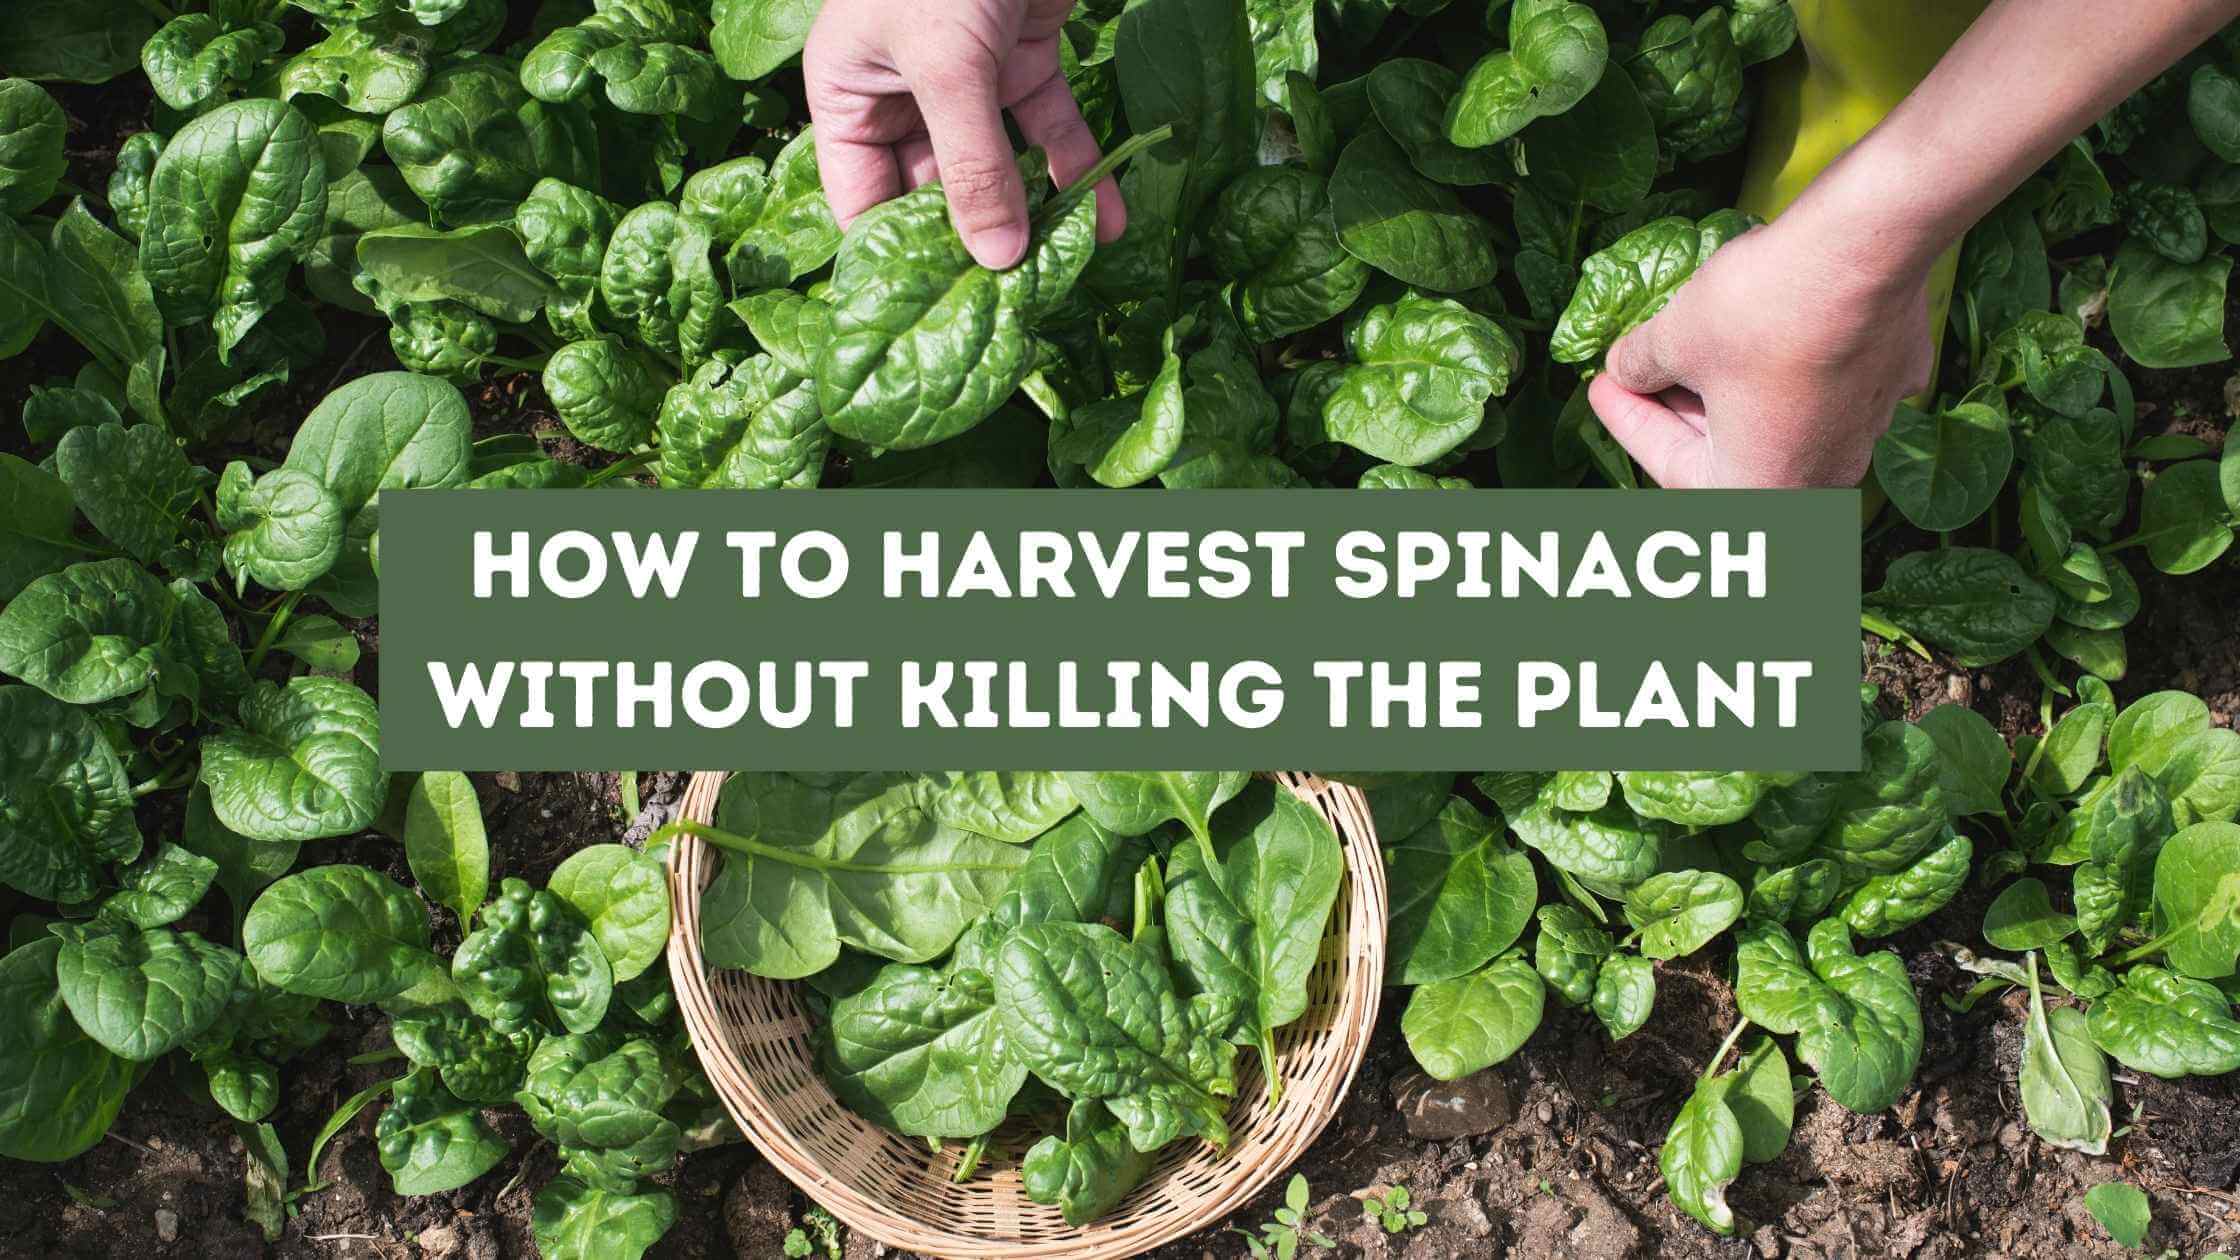 How to Harvest Spinach Without Killing the Plant